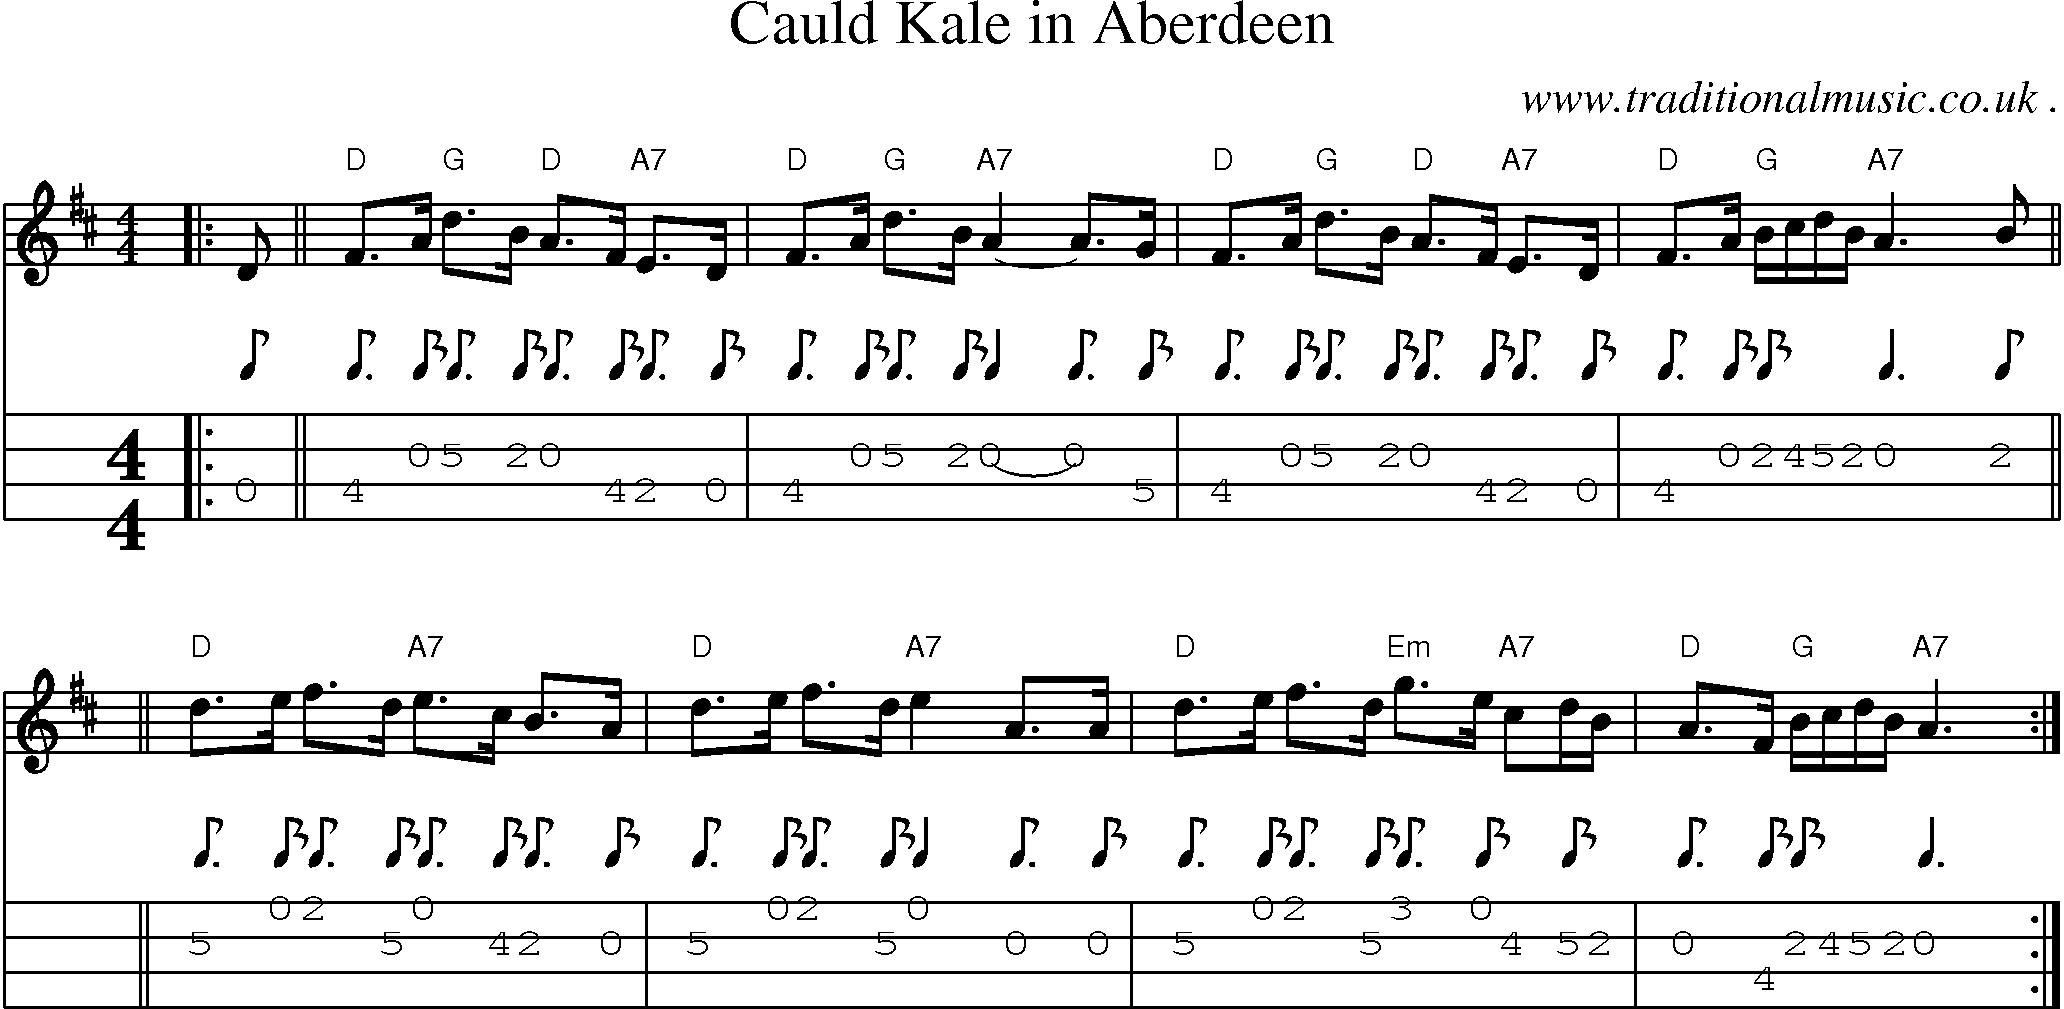 Sheet-music  score, Chords and Mandolin Tabs for Cauld Kale In Aberdeen